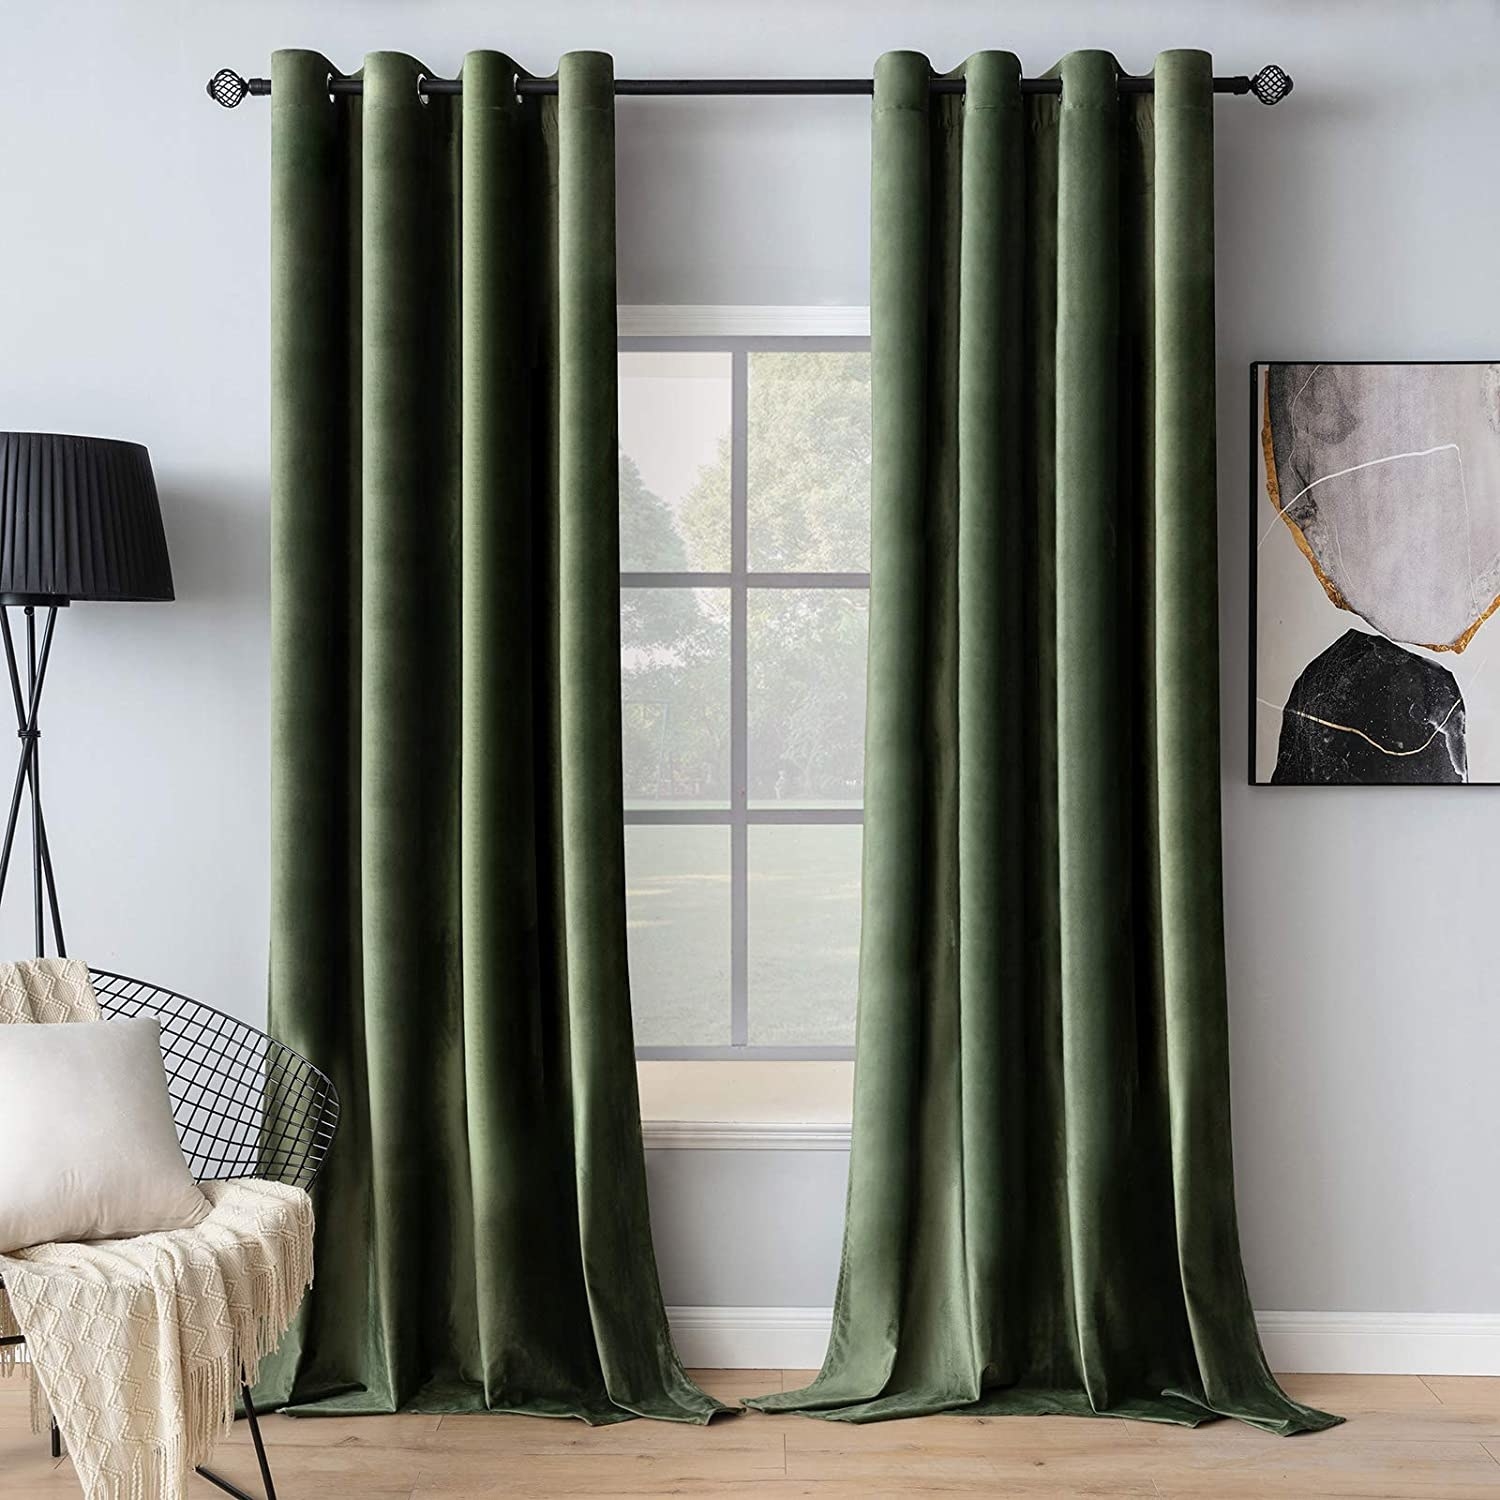 Two blackout curtains slightly covering a living room window